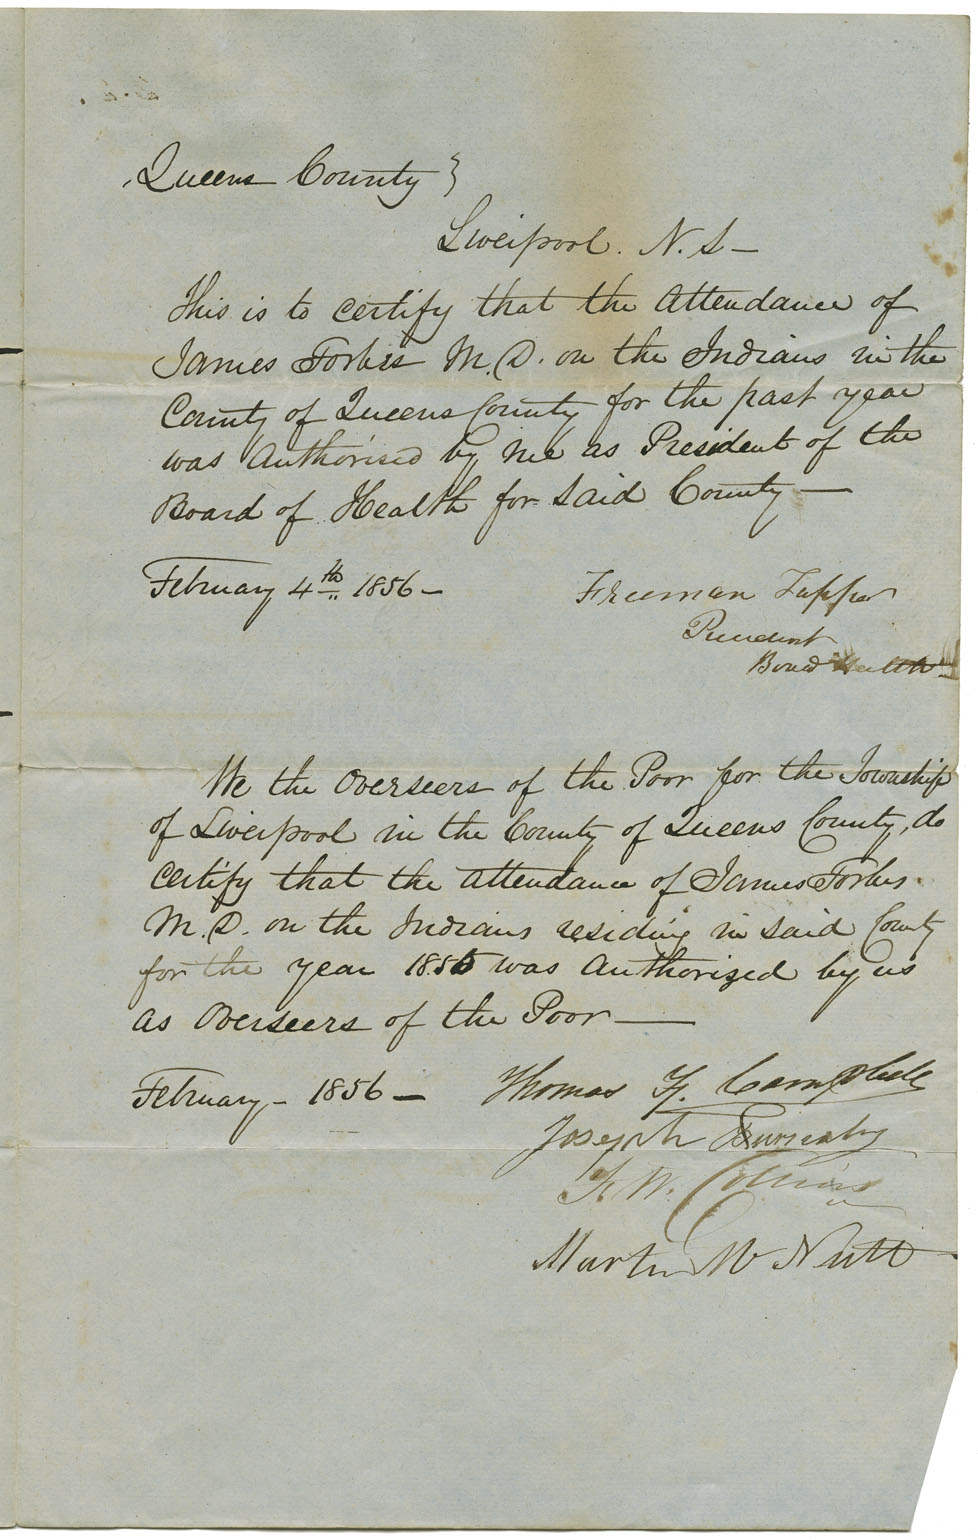 Petition of James Forbes for payment of services to Mi'kmaq of Liverpool.